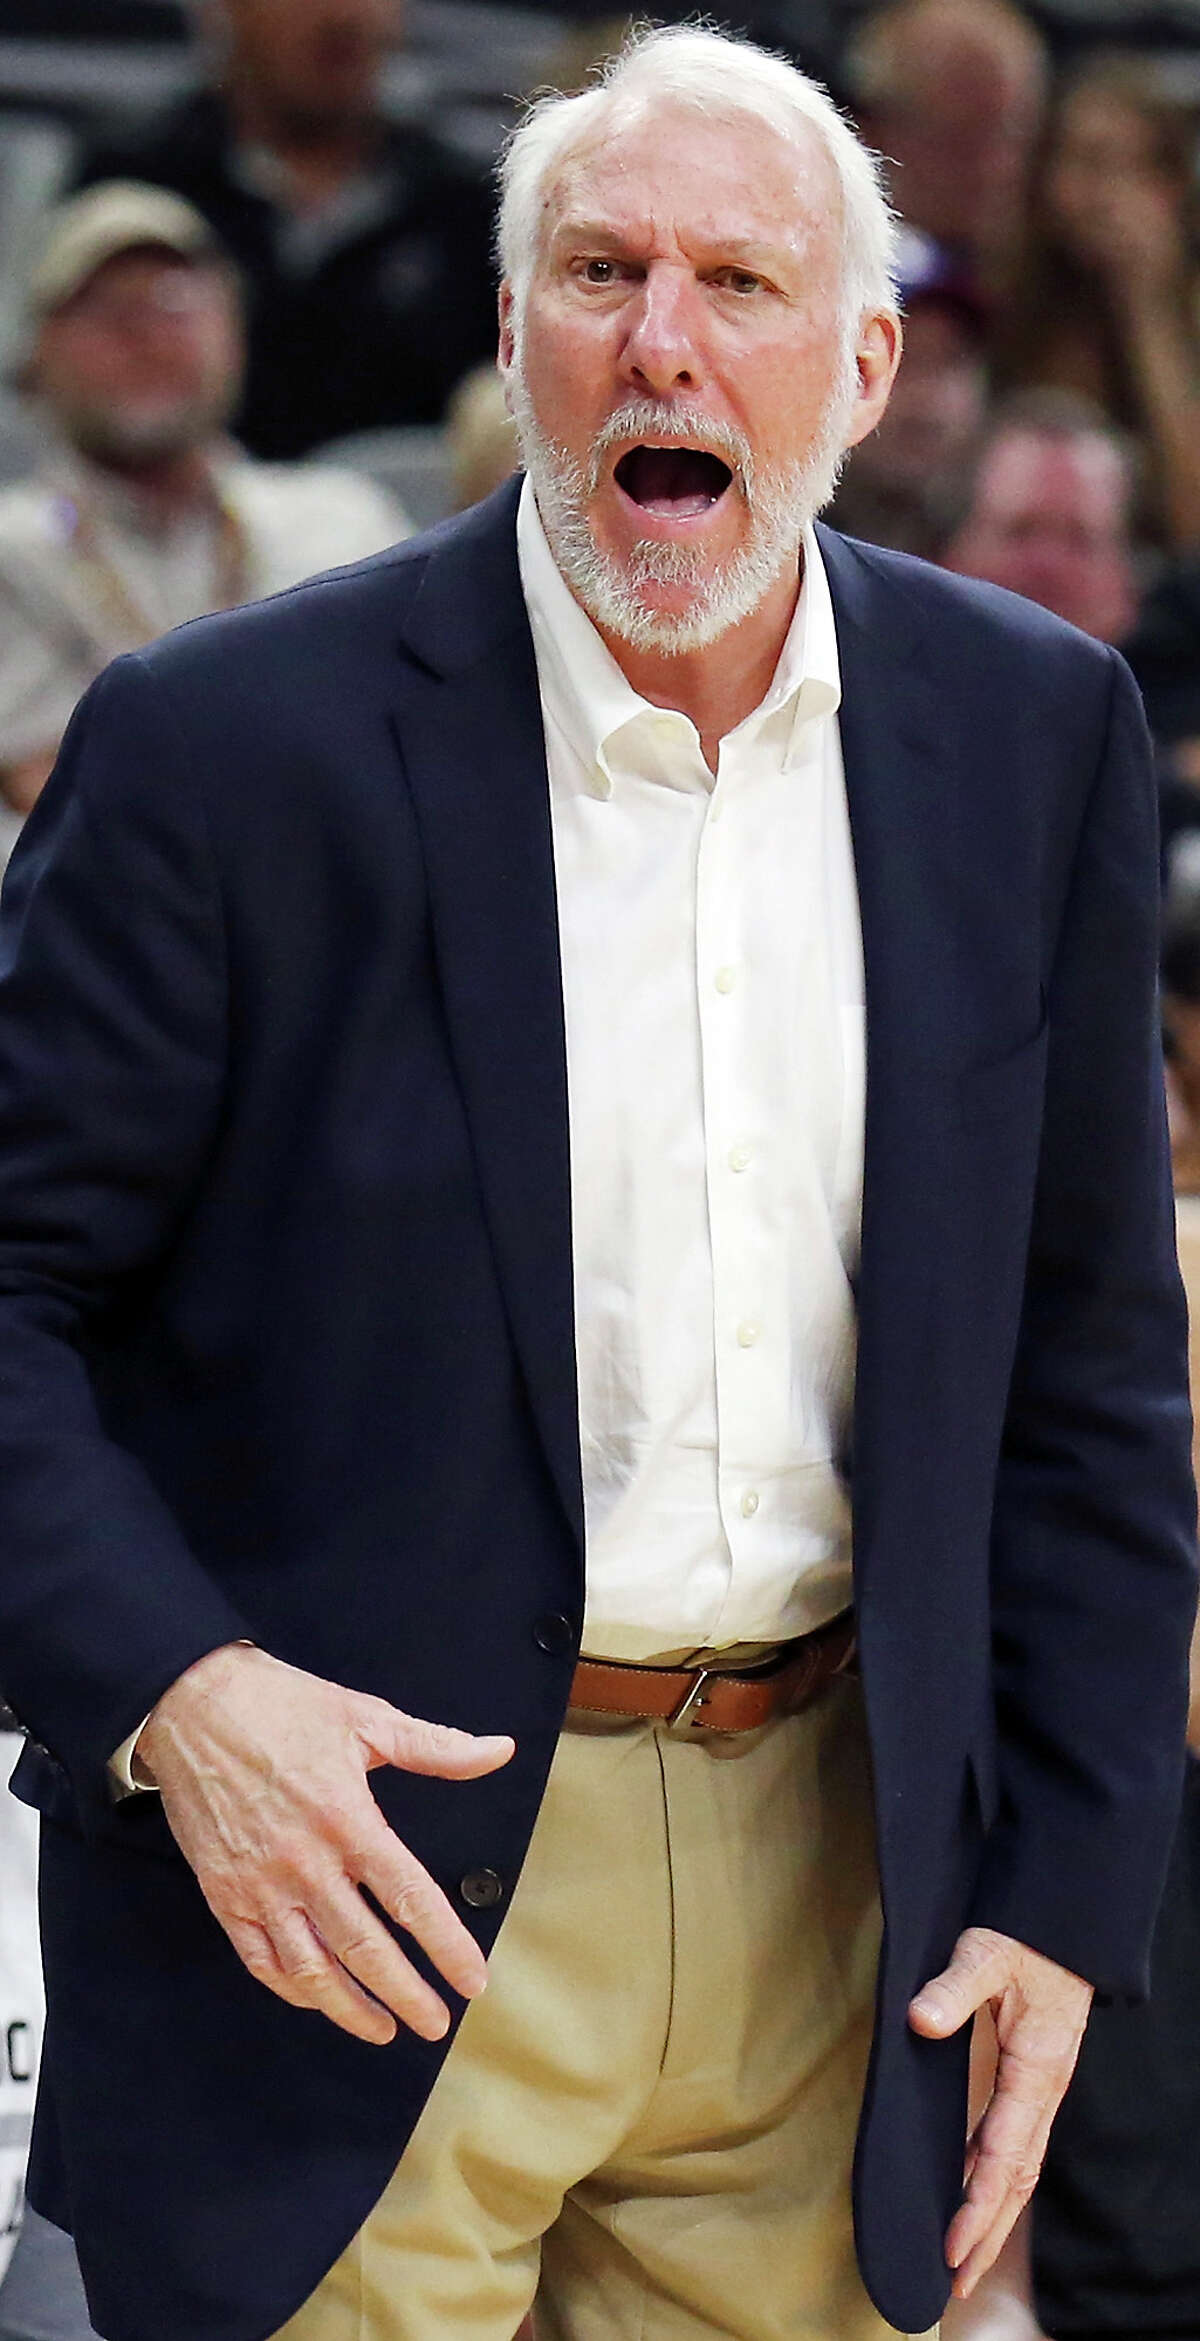 Spurs head coach Gregg Popovich reacts after a play during second half action against the Pistons Sunday Oct. 18, 2015 at the AT&T Center. The Spurs won 96-92.